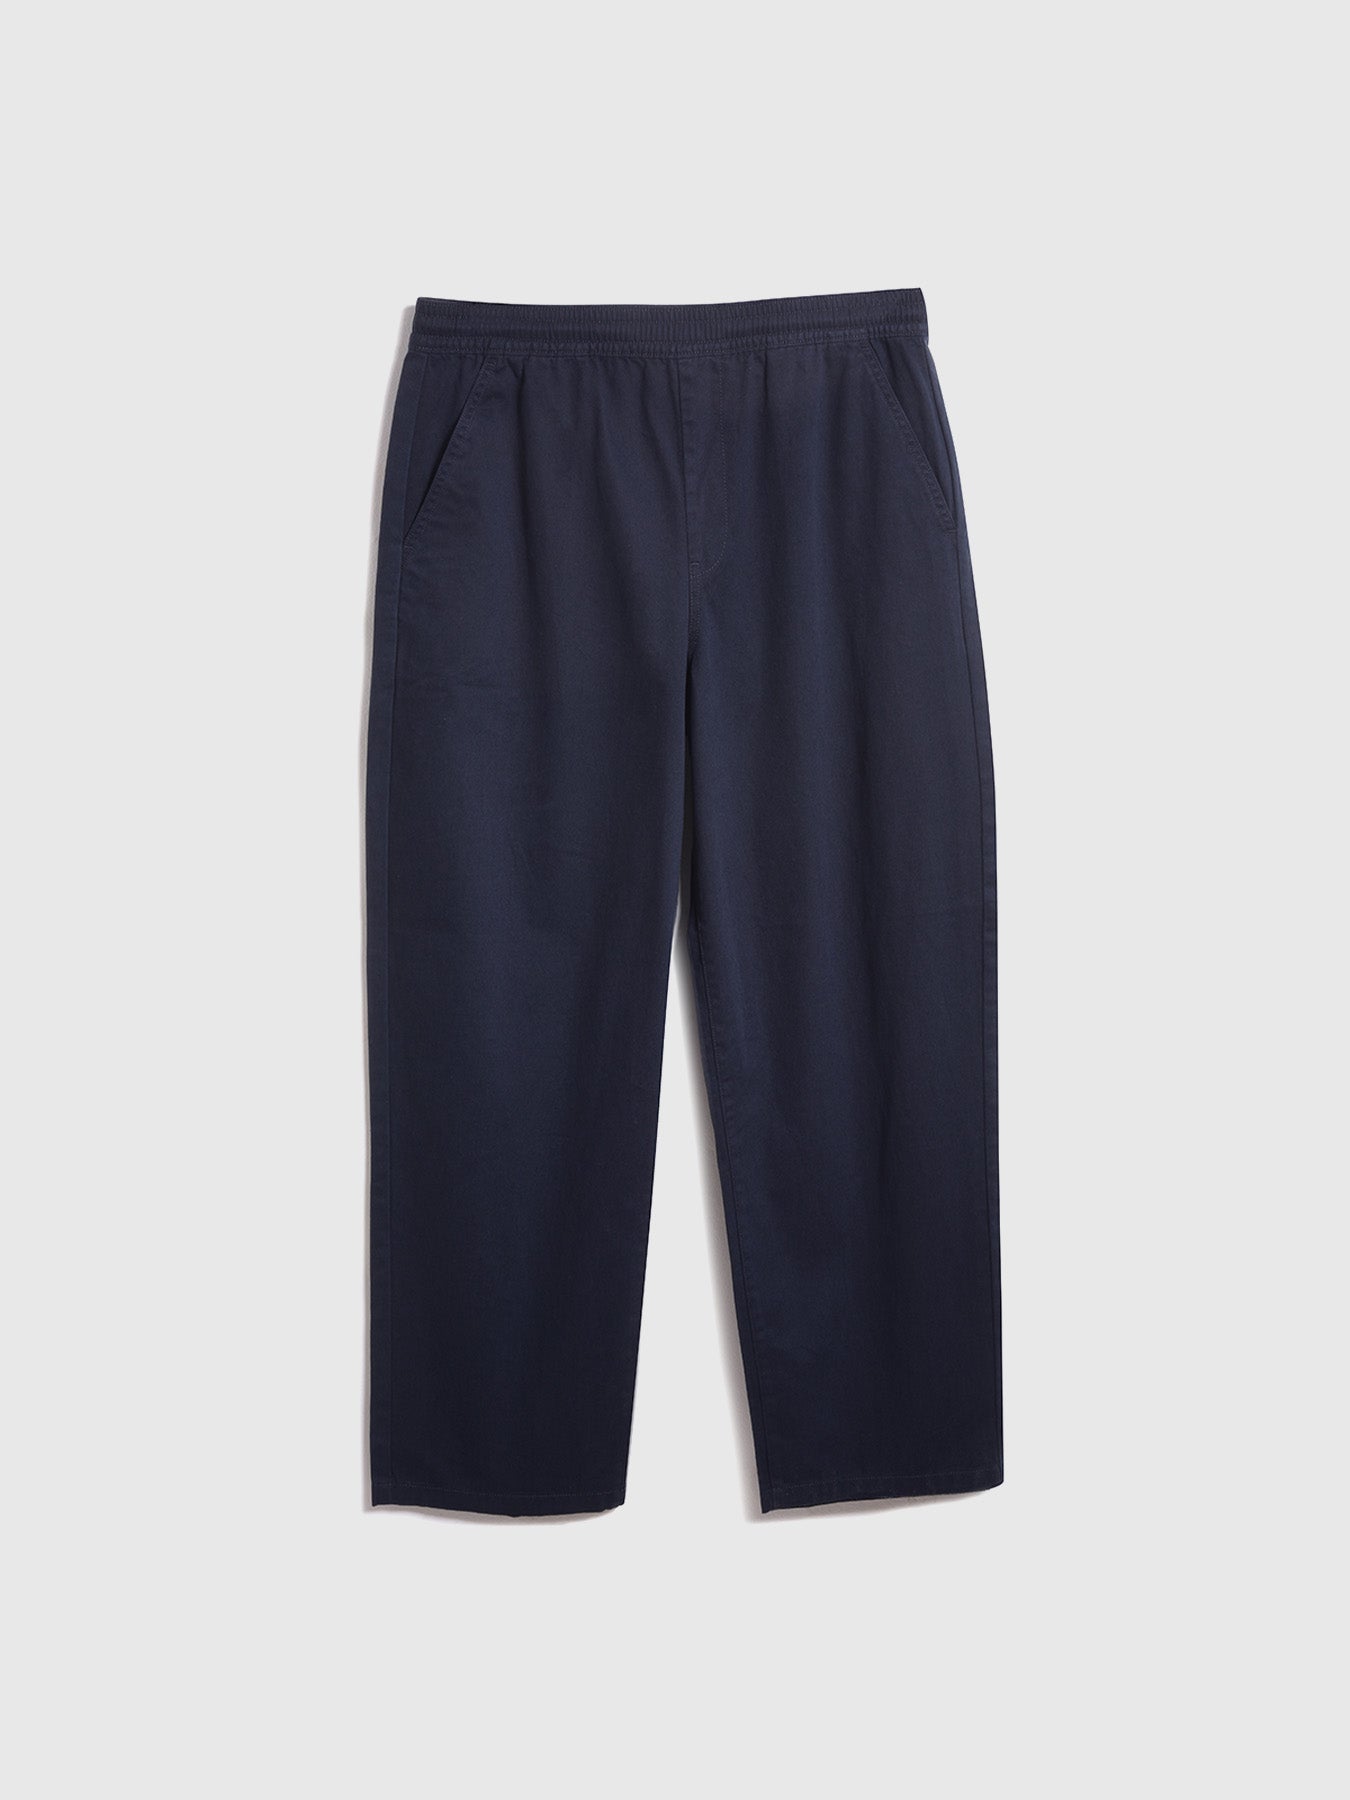 View Greenport Twill Trousers In True Navy information